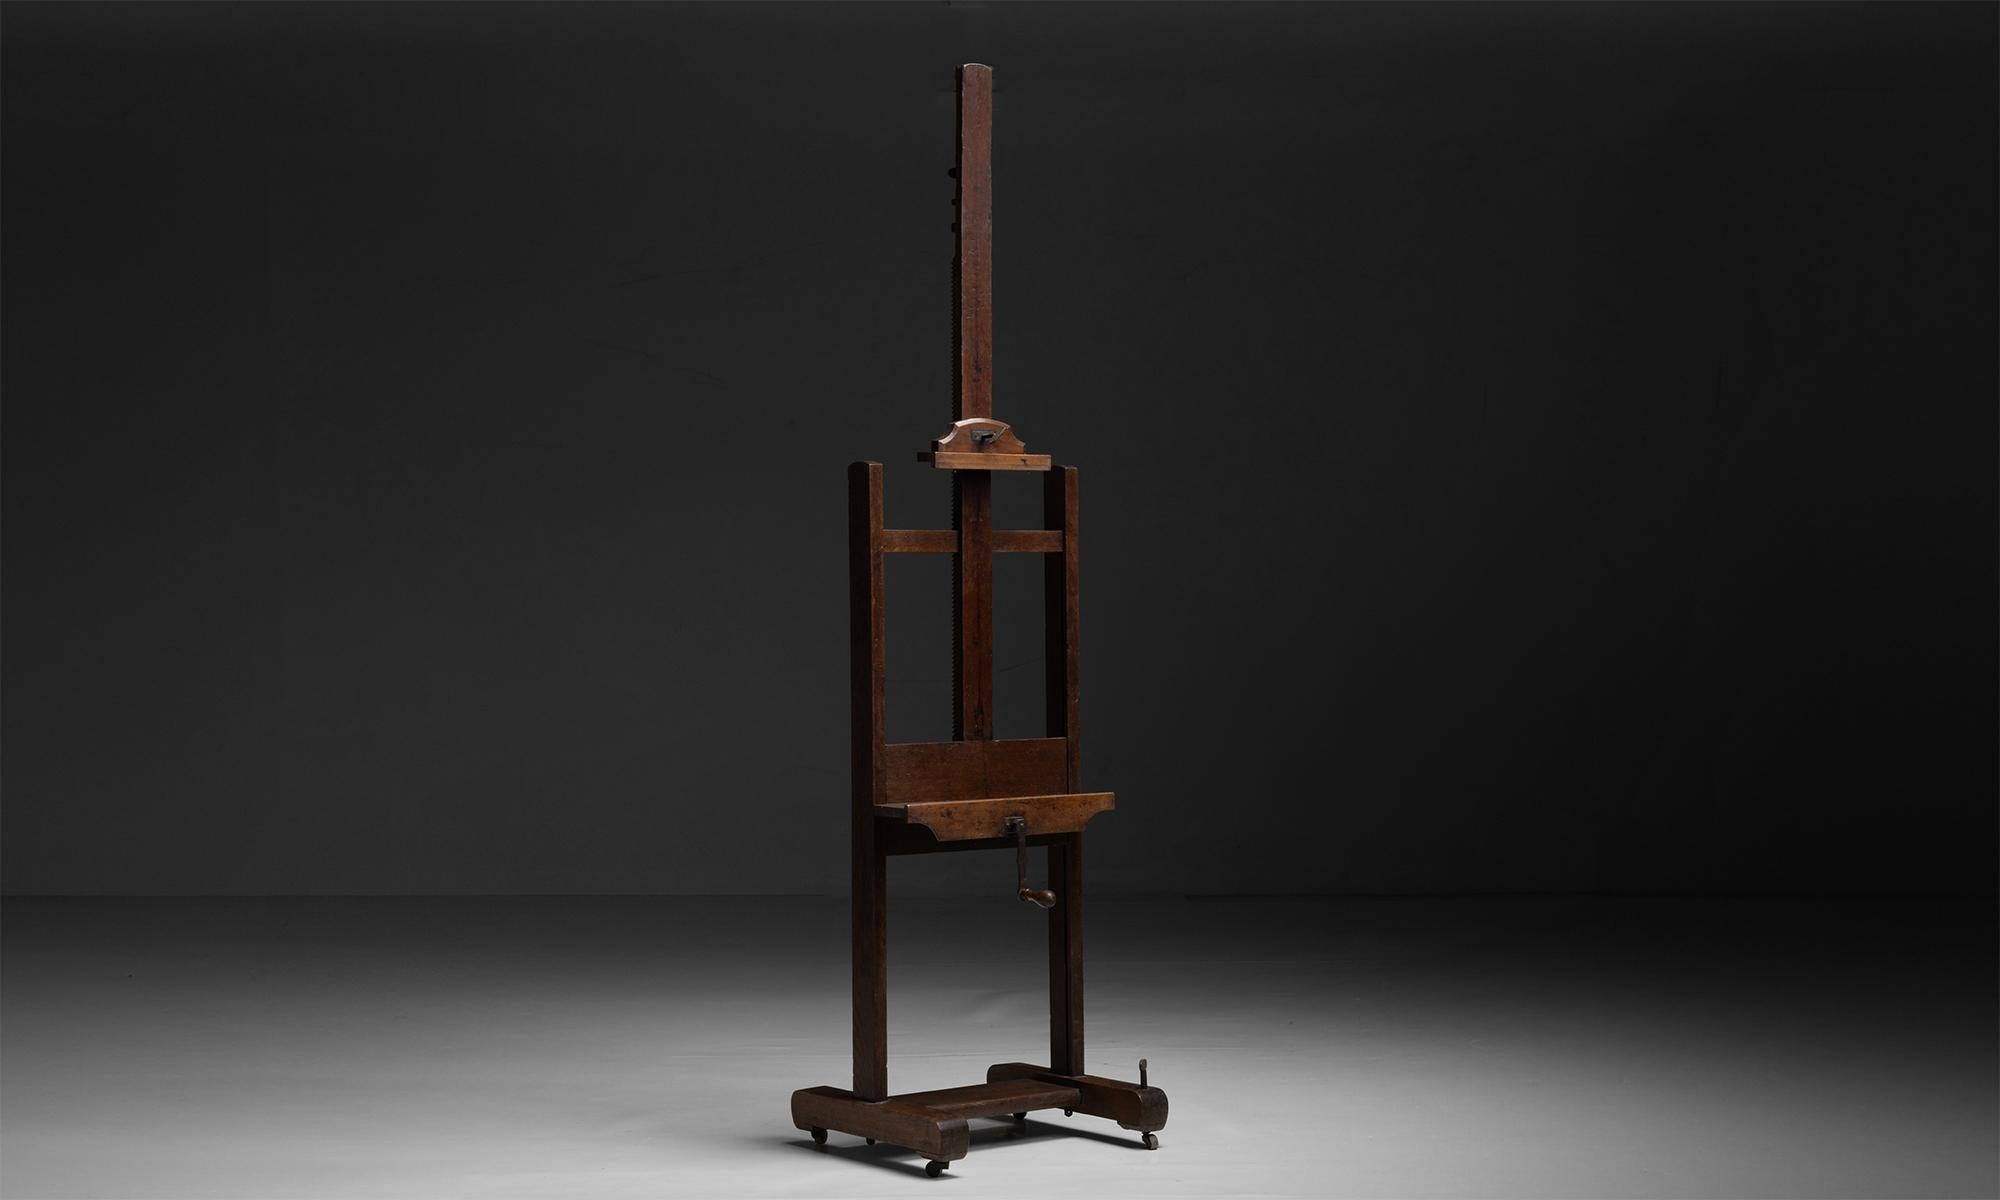 Belgium circa 1890

Wooden easel constructed in oak on wheels with adjustable heights.

27”w x 25.5”d x 97”h 

(1 of 3)